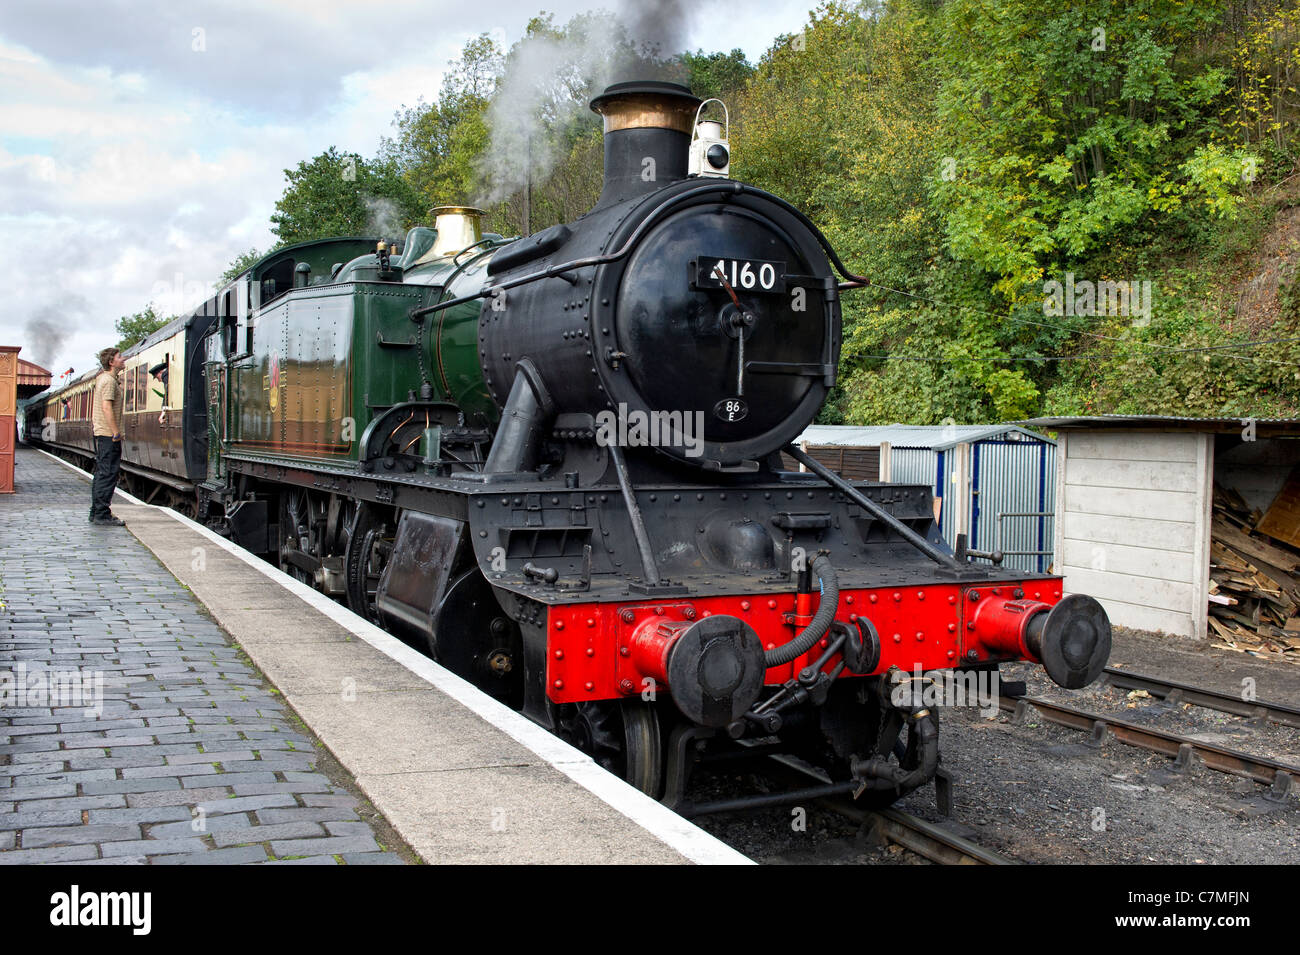 GWR Large Prairie tank 2-6-2 No 4160 Steam Locomotive at Bewdley Station in Worcestershire on the Severn Valley Railway Stock Photo